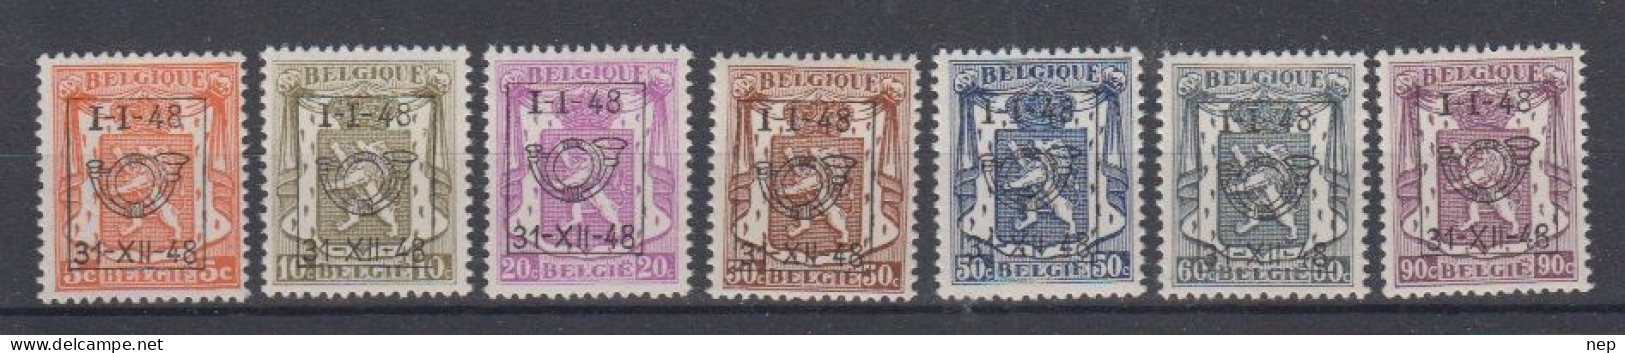 BELGIË - OBP - 1948 - PRE 574/80 (34 Type C) - MNH** - Typo Precancels 1936-51 (Small Seal Of The State)